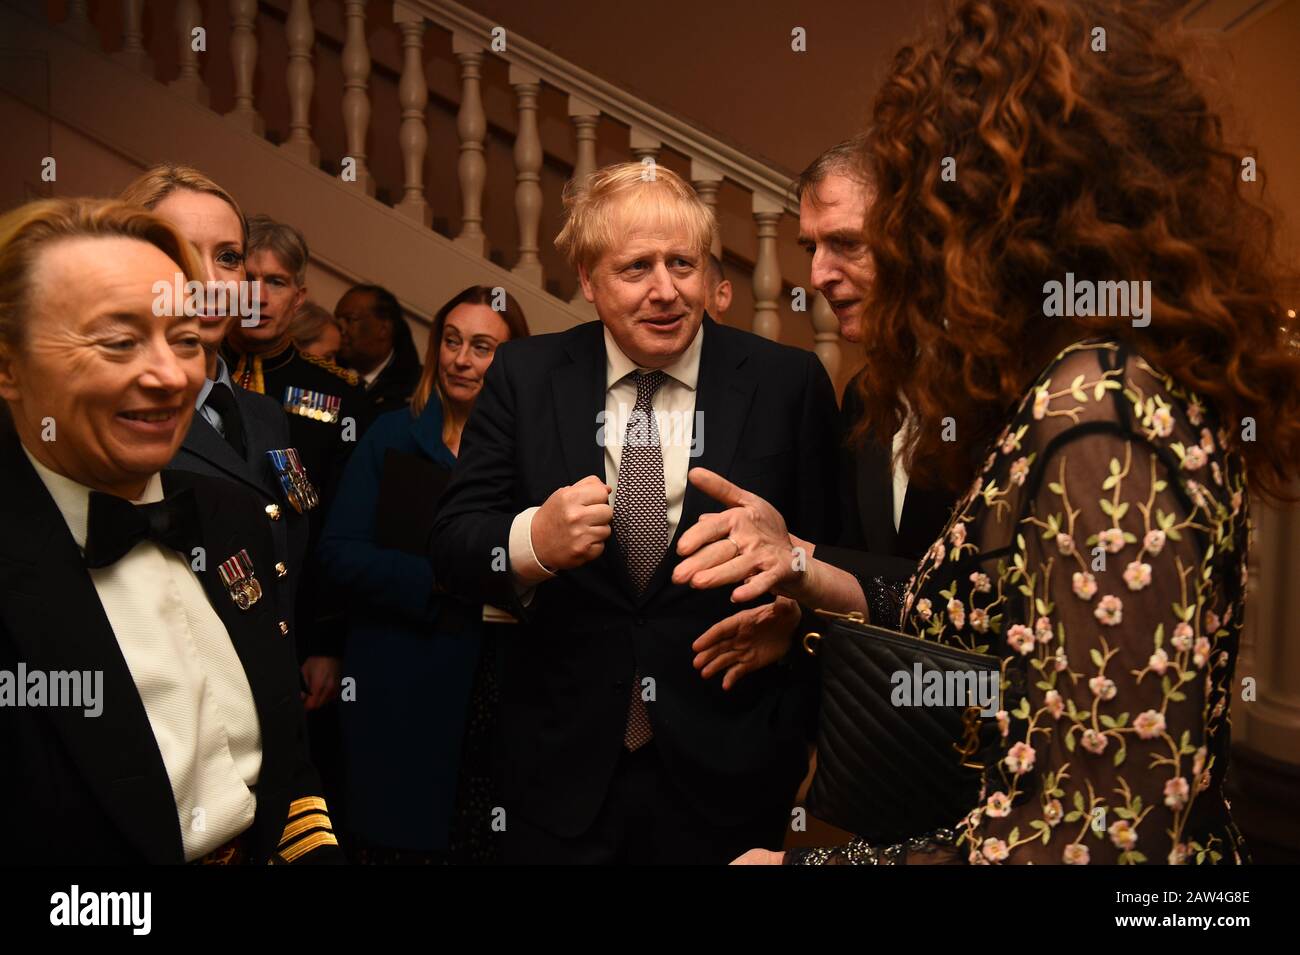 Rebekah Brooks (right) Chief Executive of News UK and Tony Gallagher Editor in Chief, The Sun (second right) with Prime Minister Boris Johnson as he arrives for The Sun Military Awards 2020 held at the Banqueting House, London. PA Photo. Picture date: Thursday February 6, 2020. Photo credit should read: Kirsty O'Connor/PA Wire Stock Photo